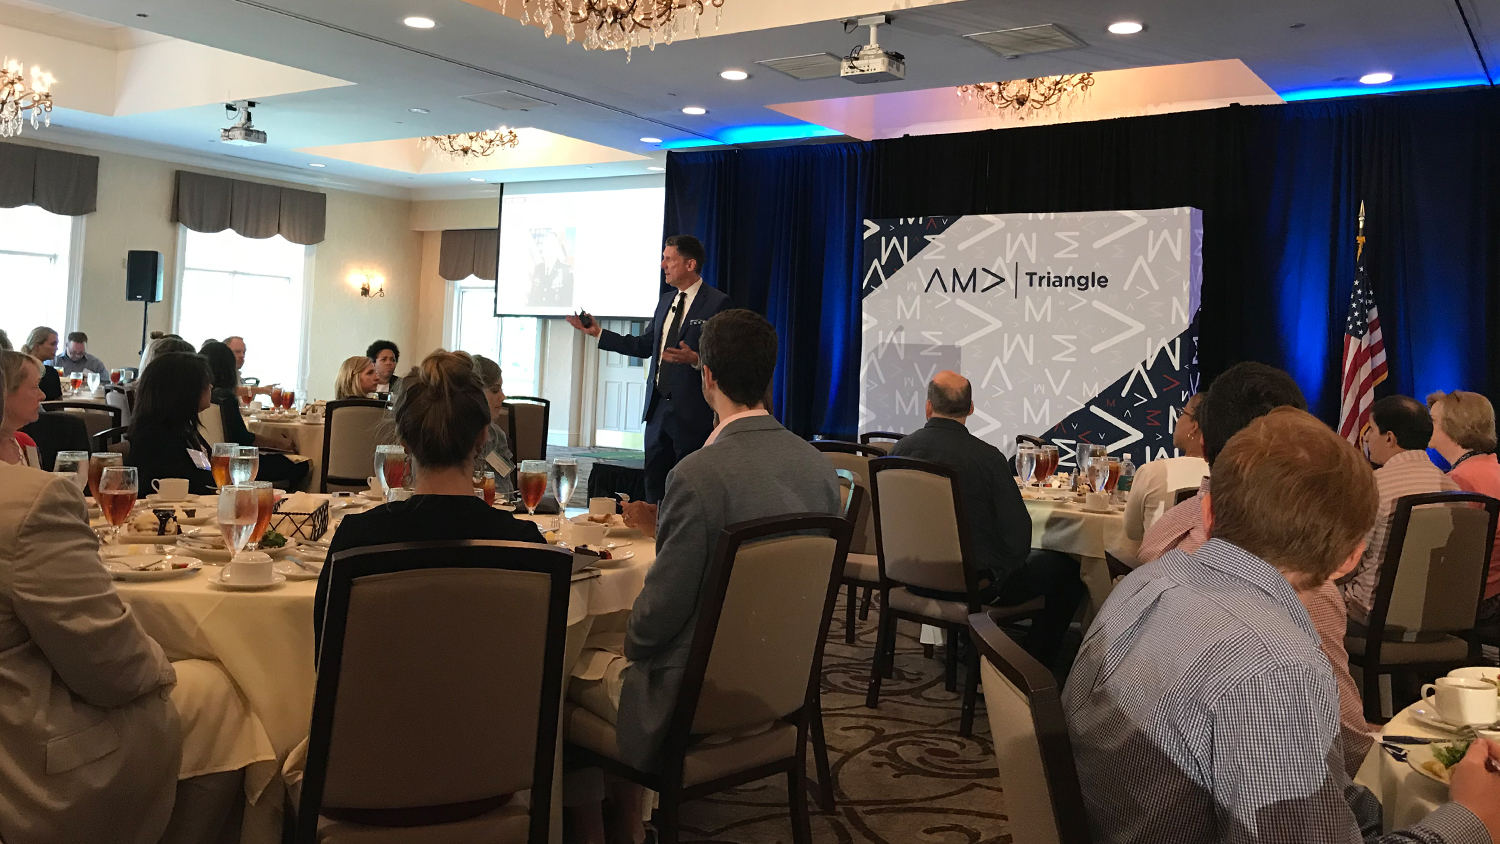 Poole College Professor Bradley Kirkman discusses leadership with AMA Triangle members at their September 2018 luncheon.